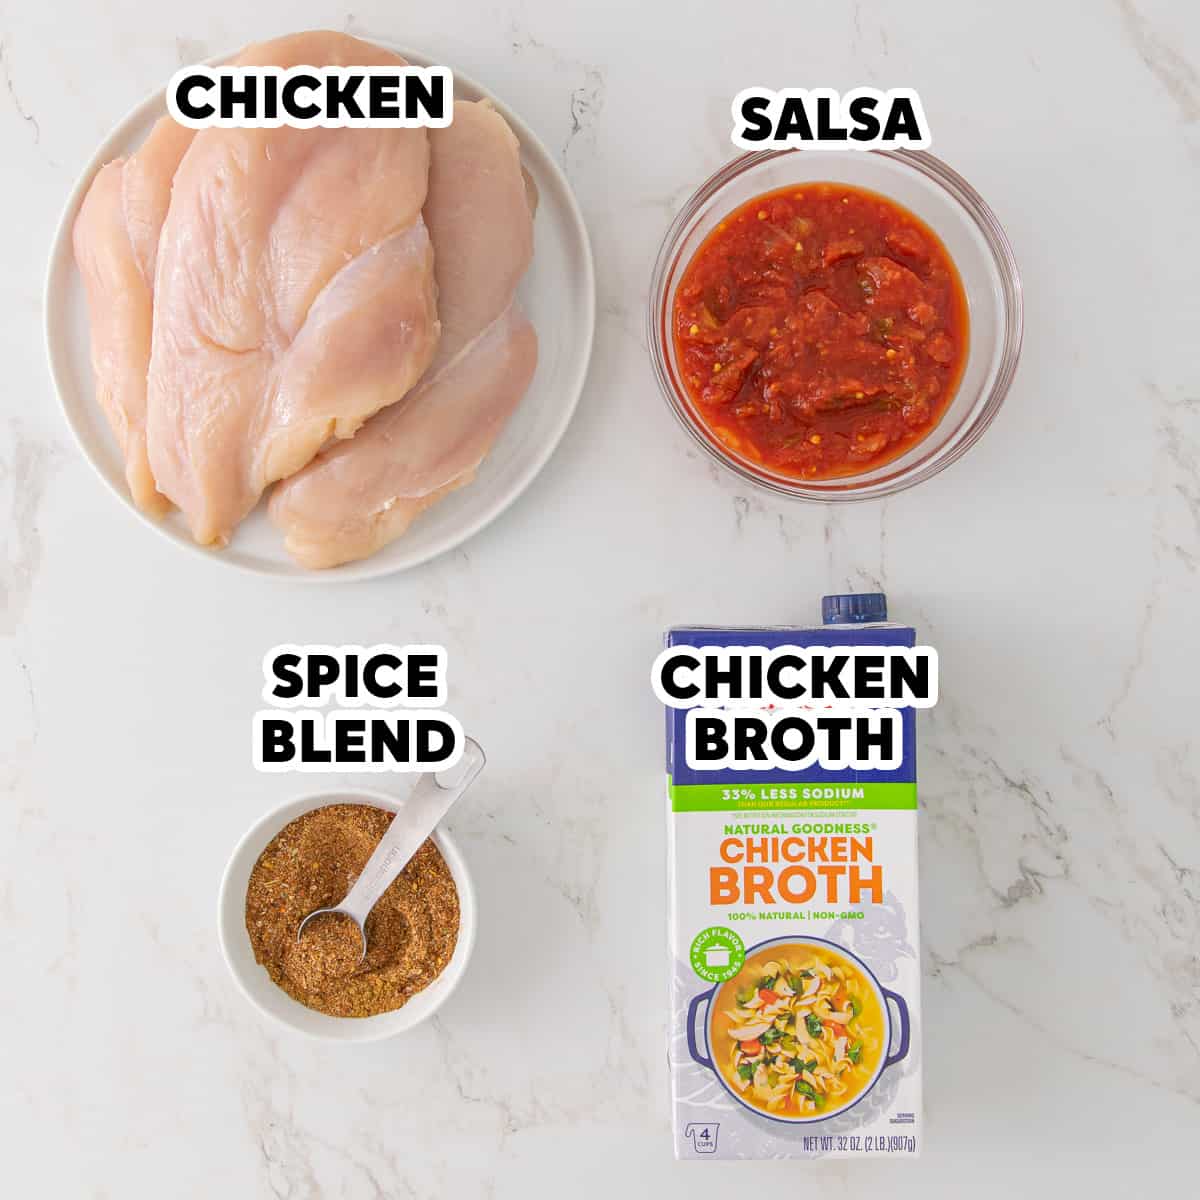 Overhead view of ingredients for Instant Pot Mexican shredded chicken: chicken breasts, salsa, a spice blend, and chicken broth.